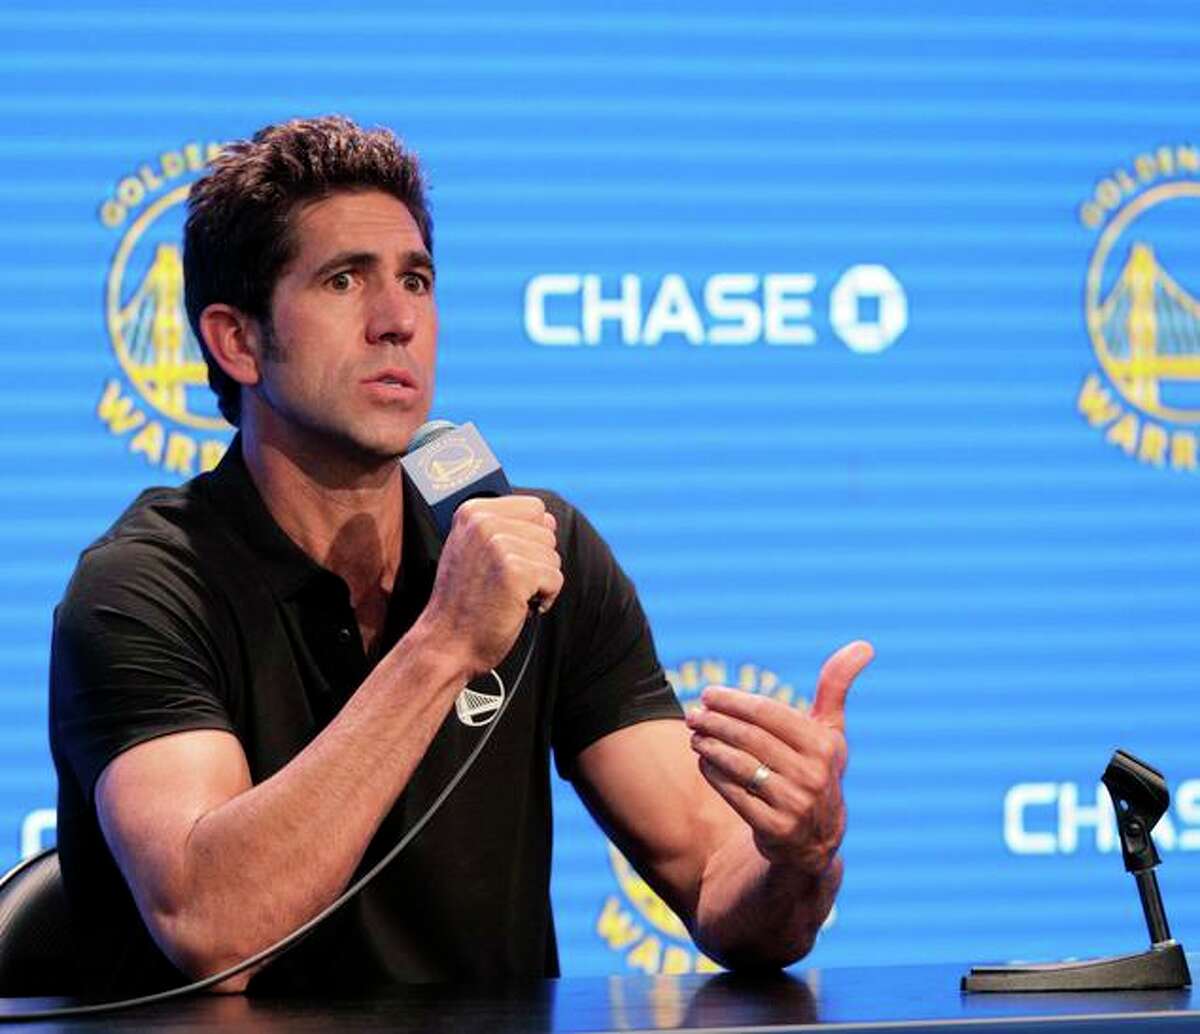 Warriors General Manager Bob Myers answers questions from reporters as the Golden State Warriors held their media day for the 2021-22 season at Chase Center in San Francisco, Calif., on Monday, September 27, 2021.